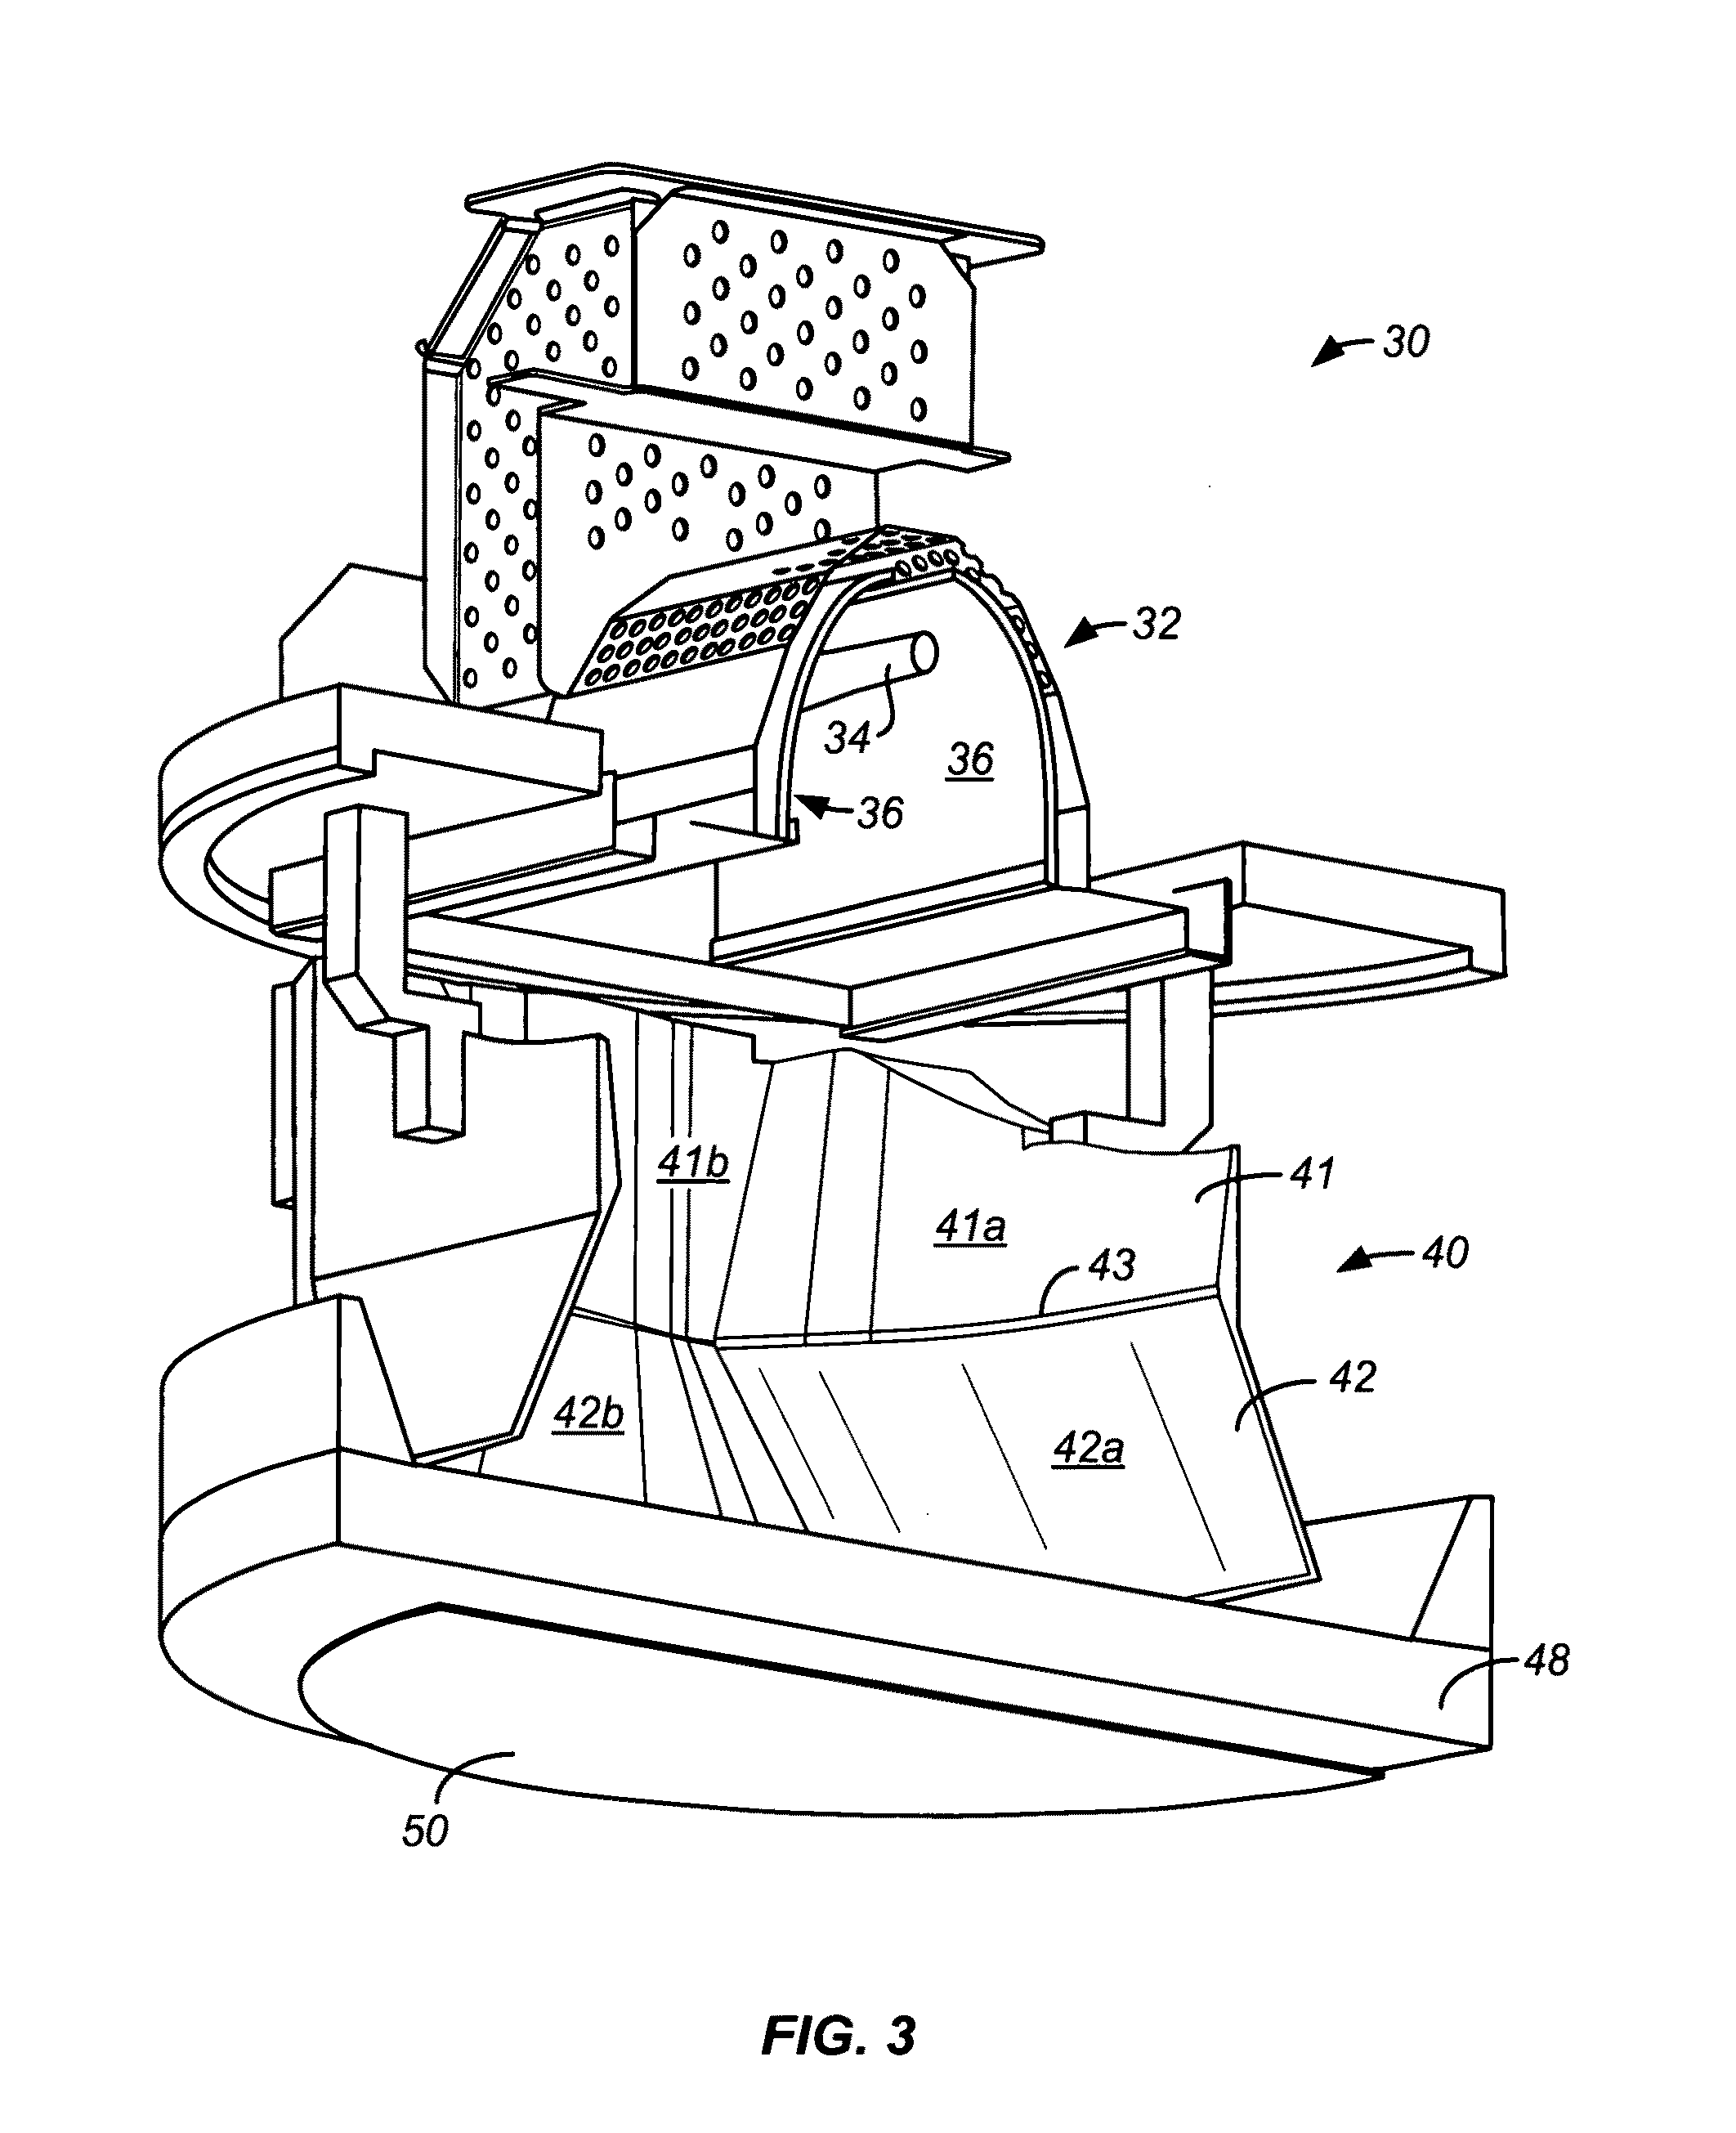 Apparatus and method for exposing a substrate to UV radiation using asymmetric reflectors